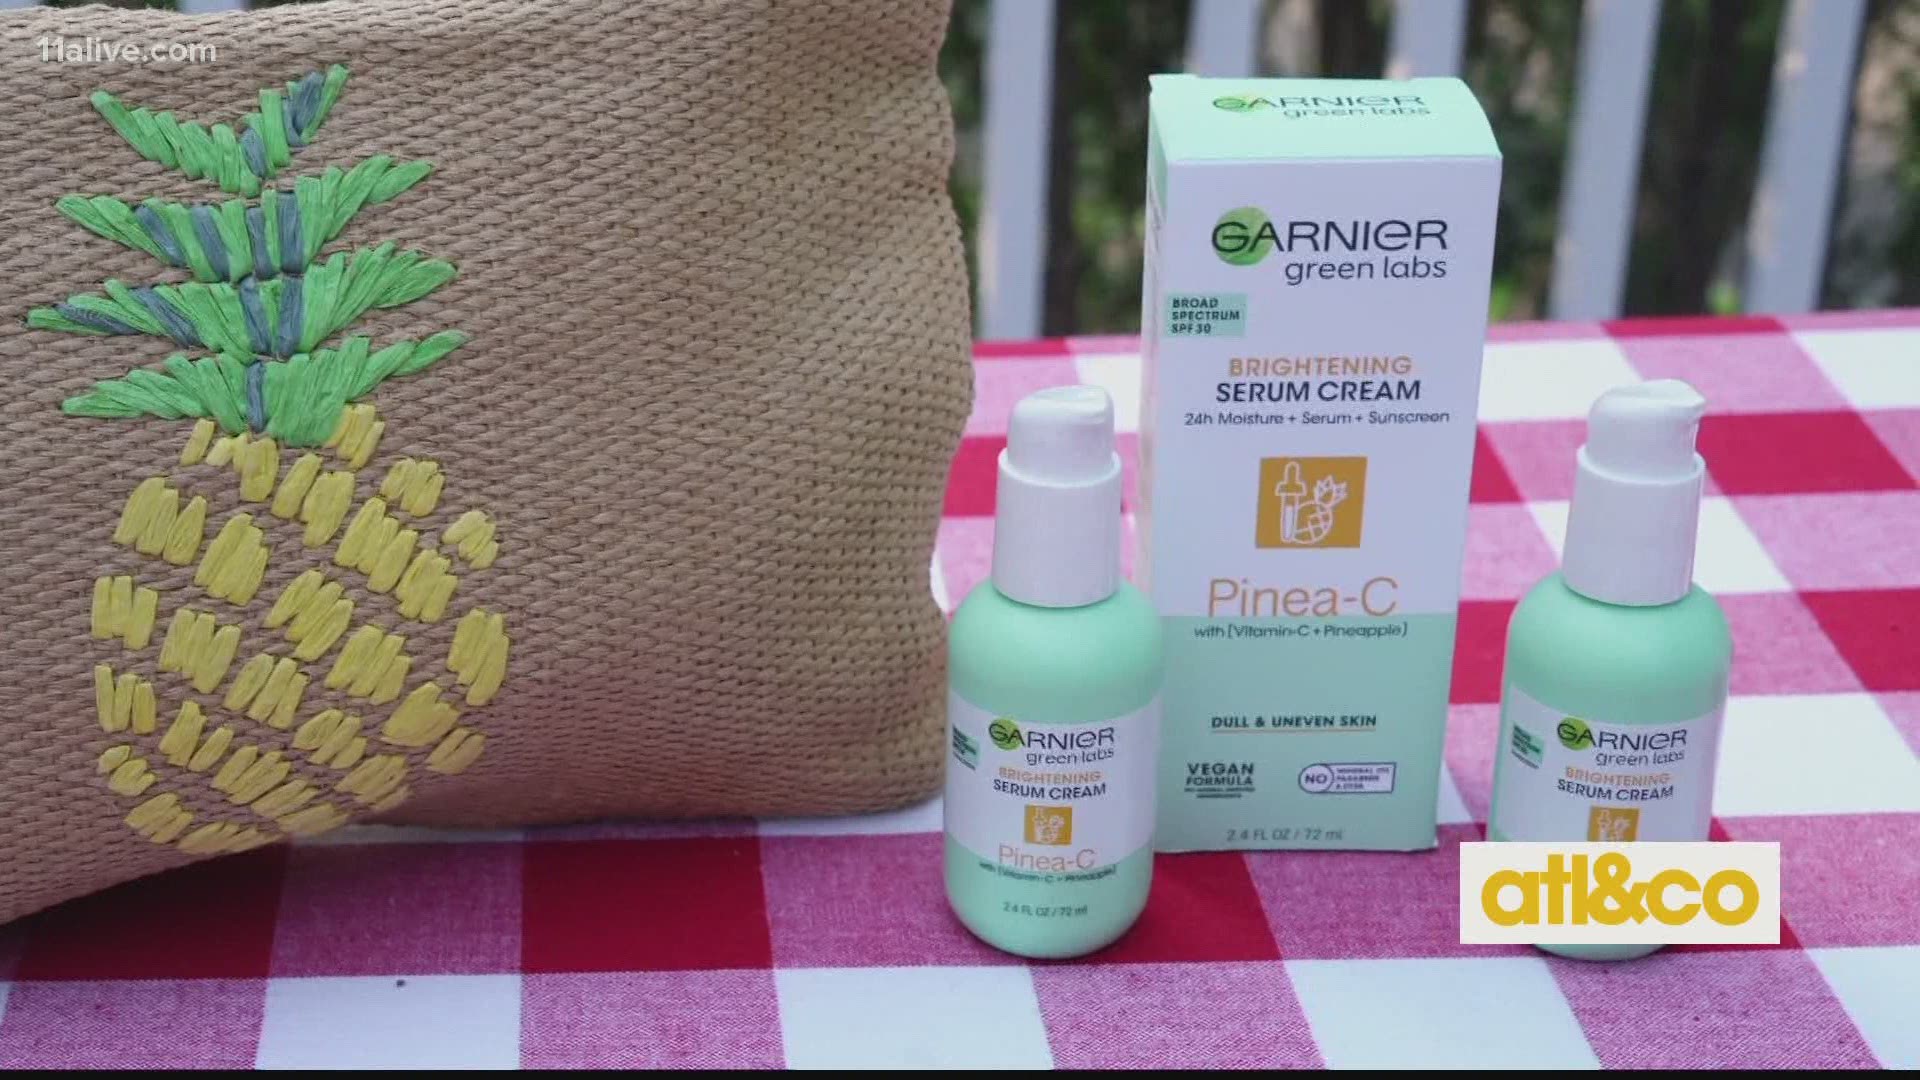 Lifestyle contributor Limor Suss shares products to make us look and feel our best this summer.